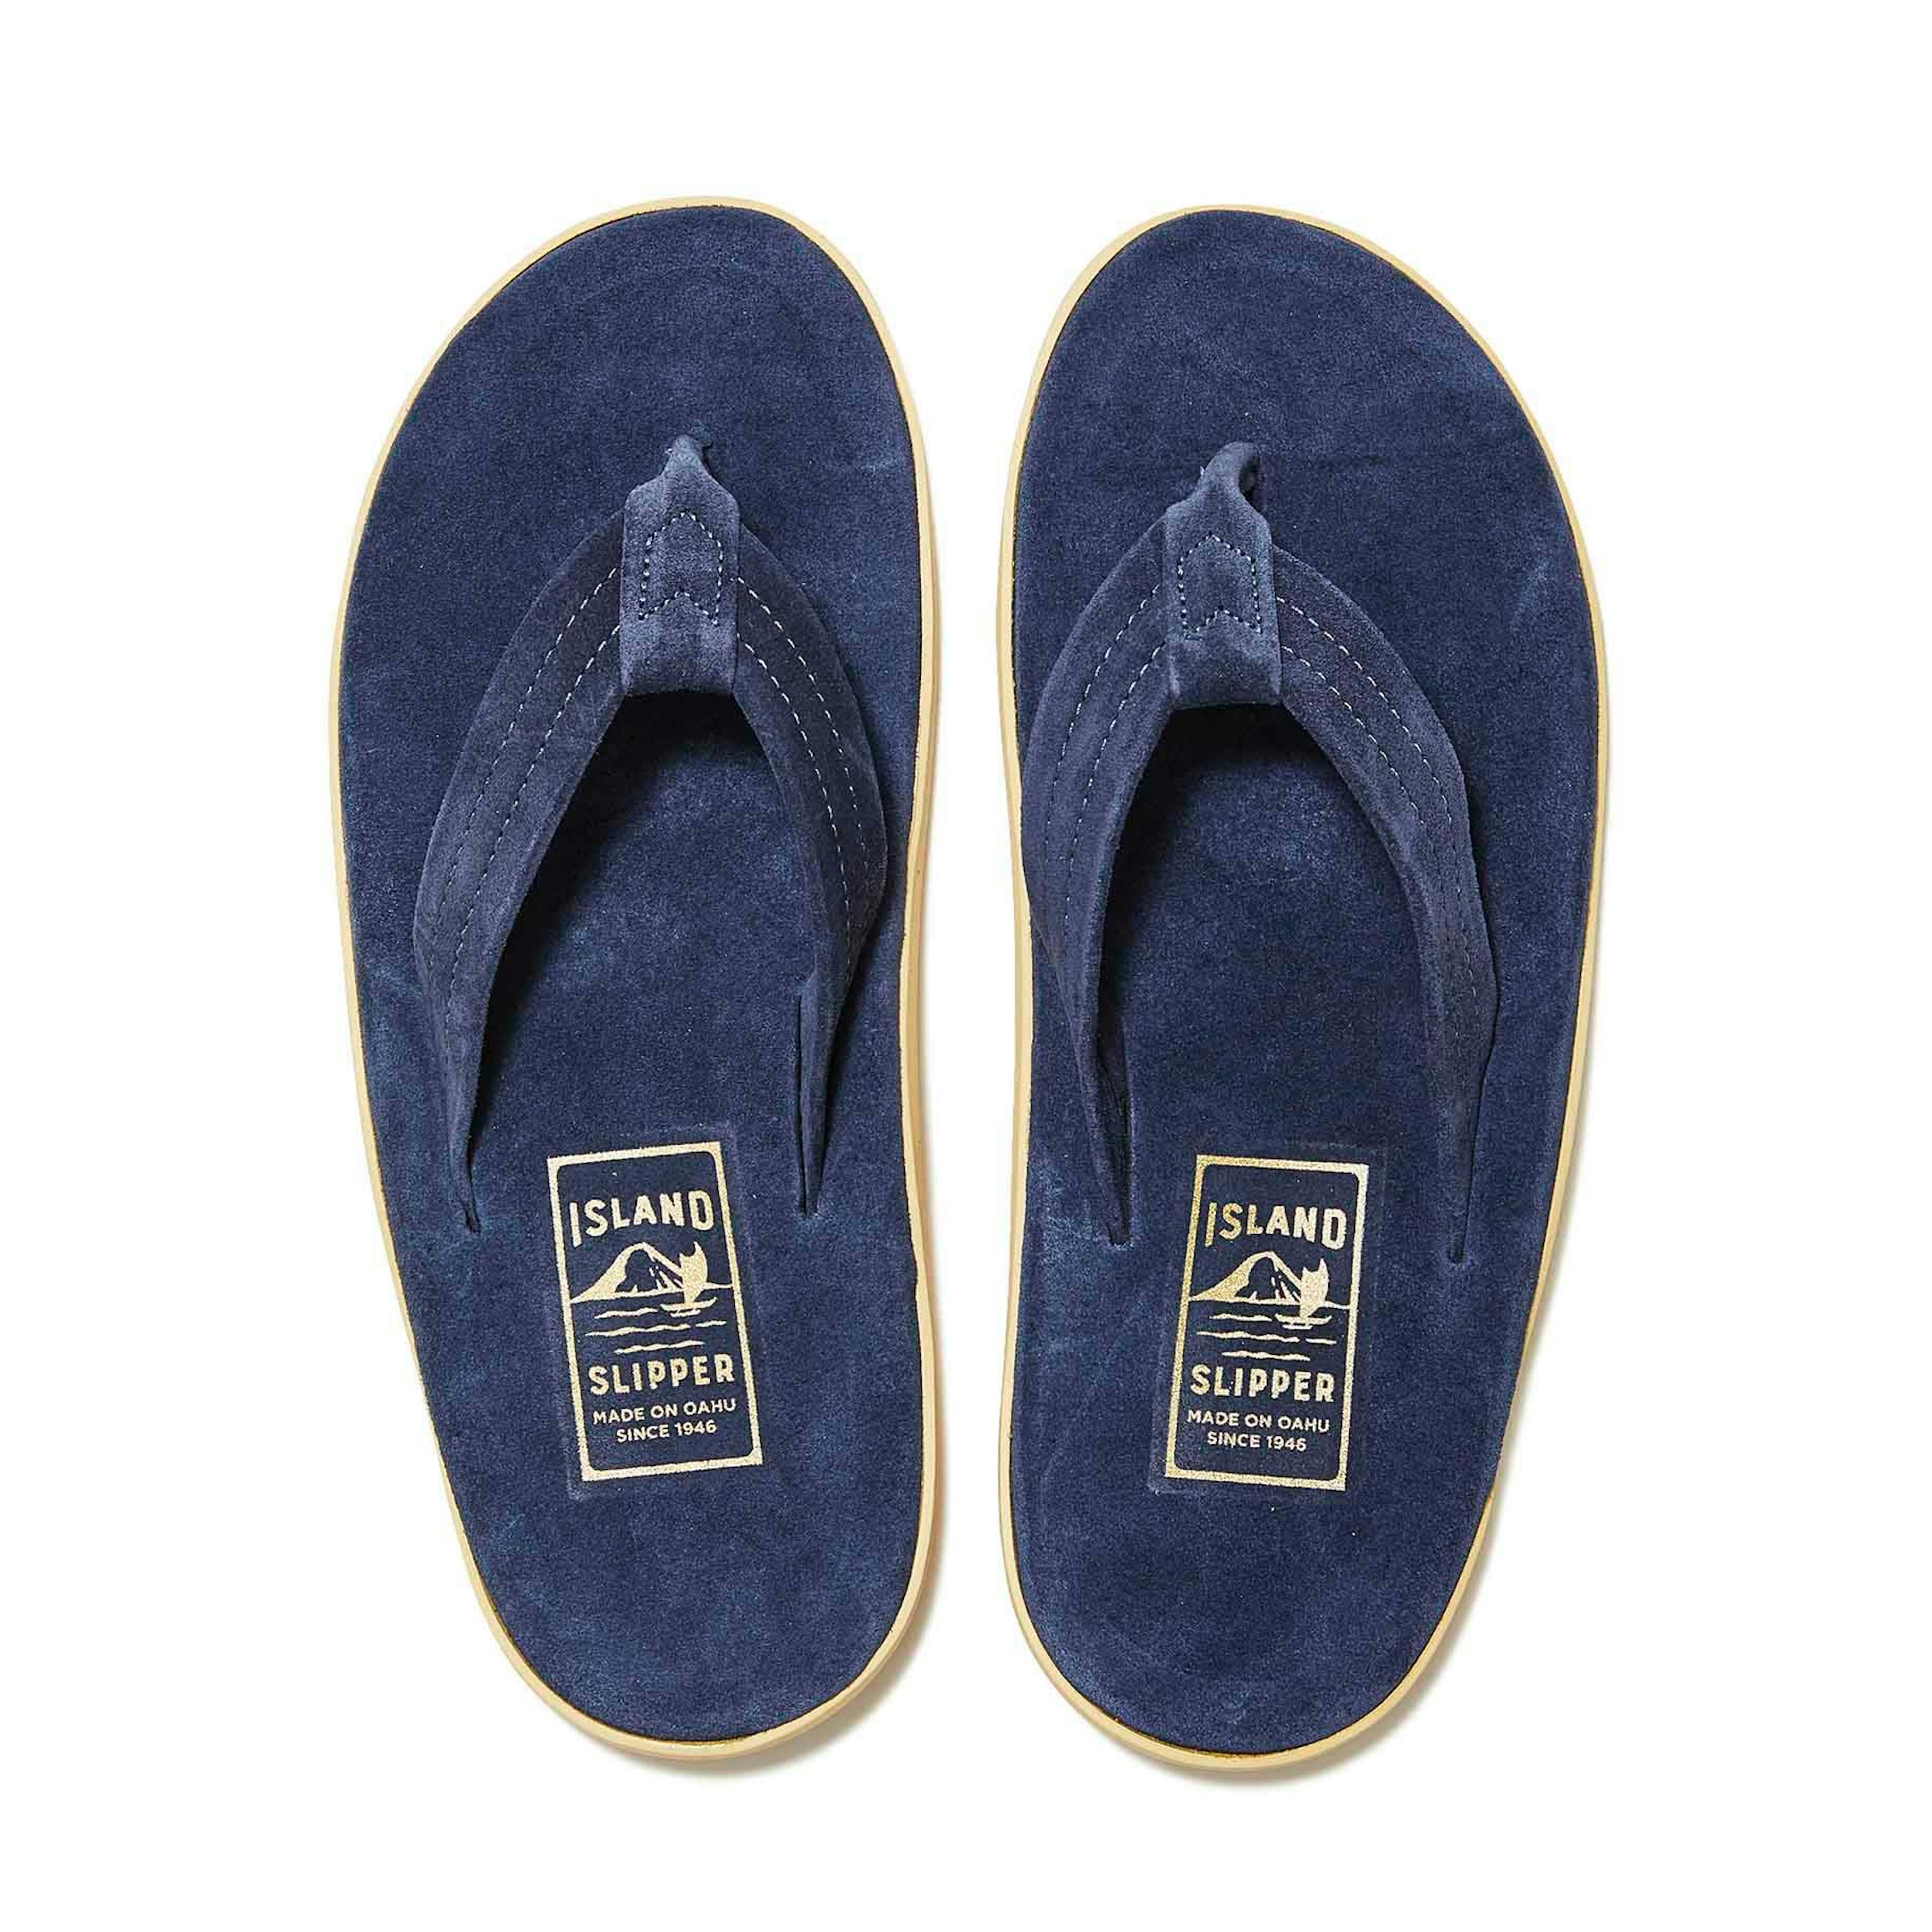 PT203 NAVY SUEDE, 22,000 yen (tax included)